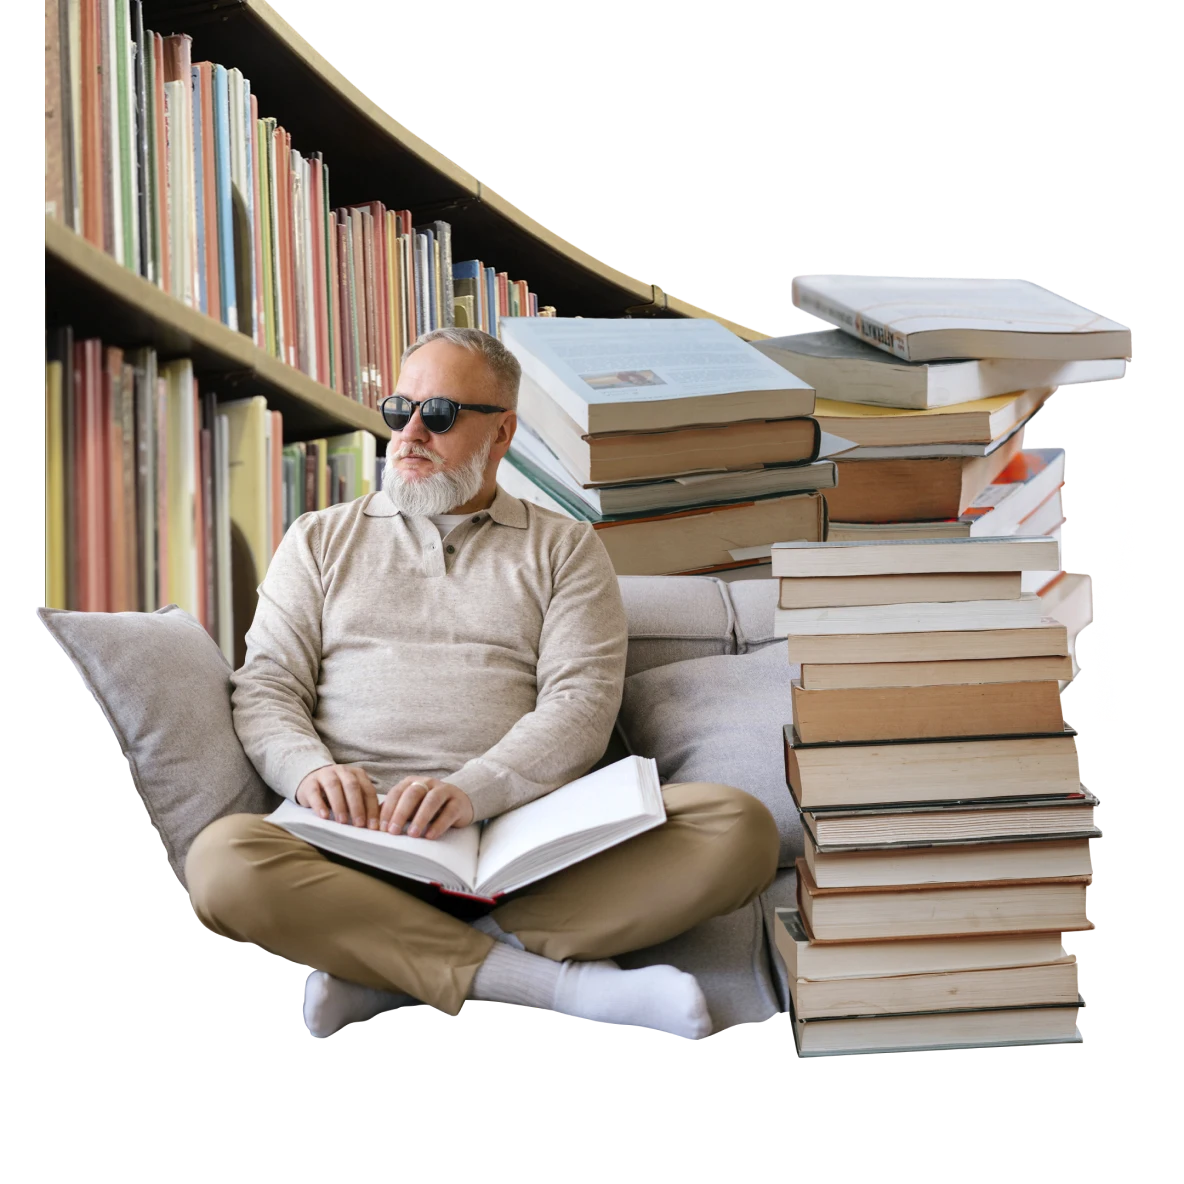 A visually impaired white man wearing sunglasses, sits cross-legged reading braille. He’s surrounded by stacks of books with a library bookshelf in the background.